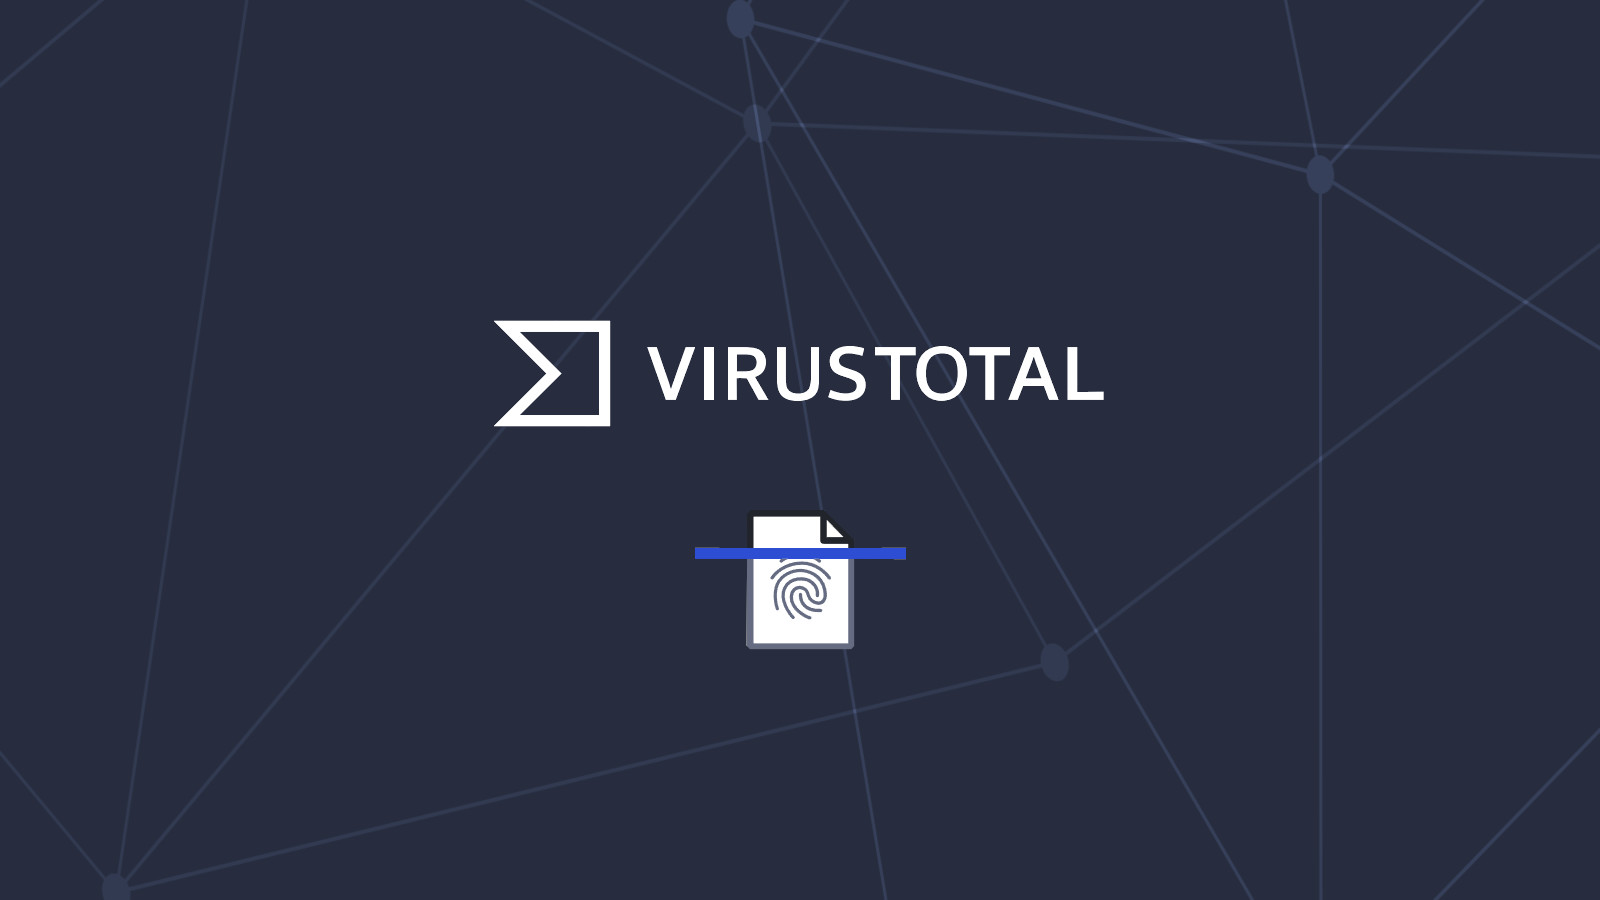 VirusTotal cheat sheet narrows searches to more specific results